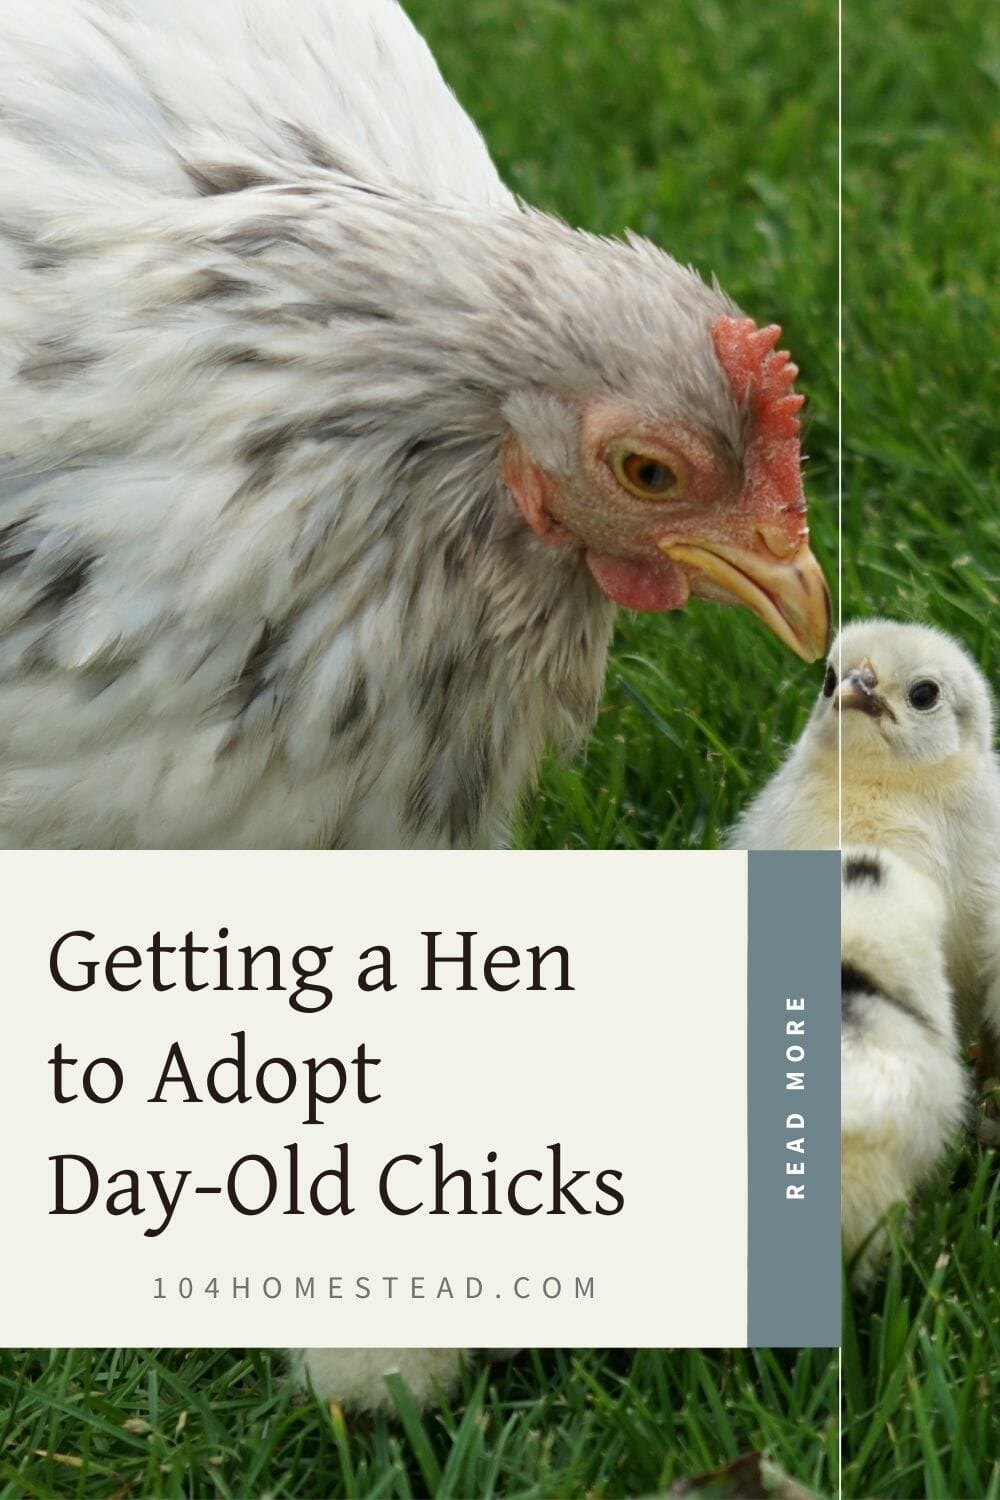 A pinterest-friendly graphic about how to introduce a broody hen to day-old chicks.